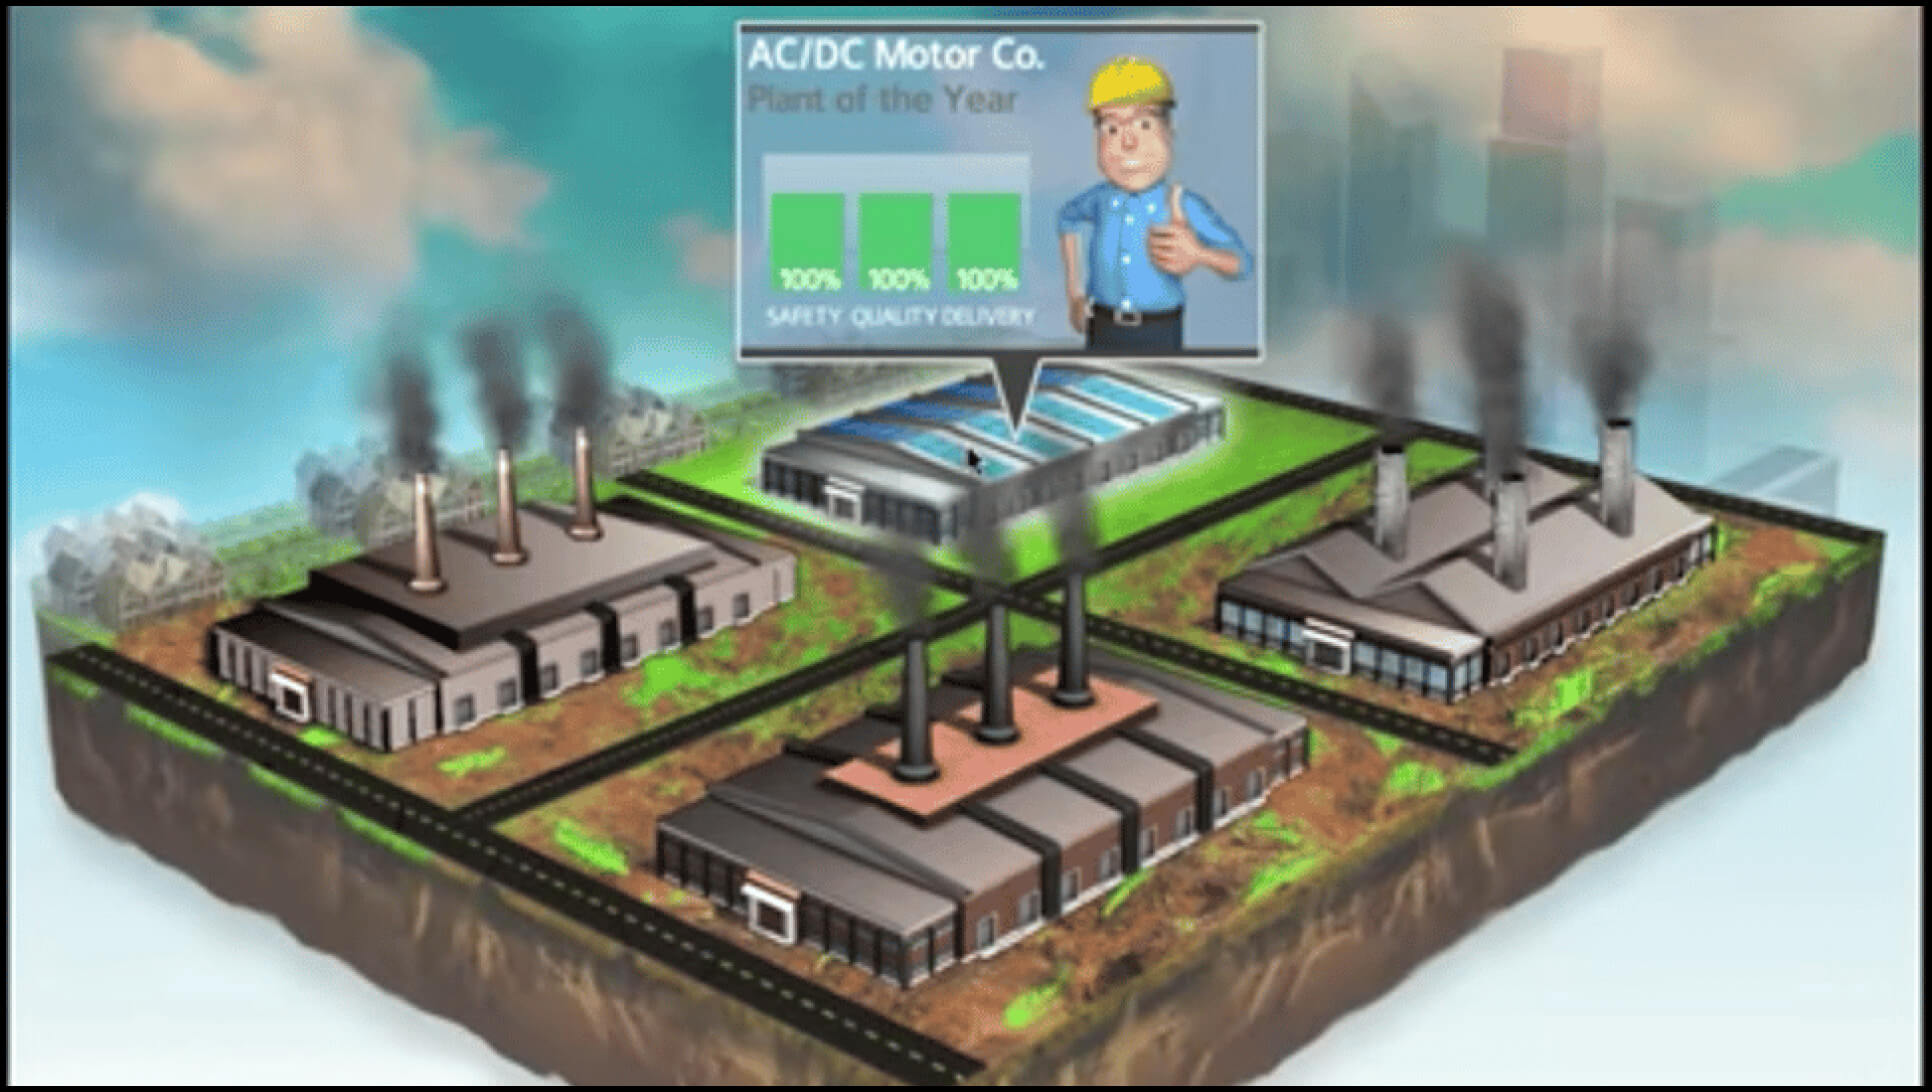 Siemens story-based learning game Plantsville for employee training in plant operations.